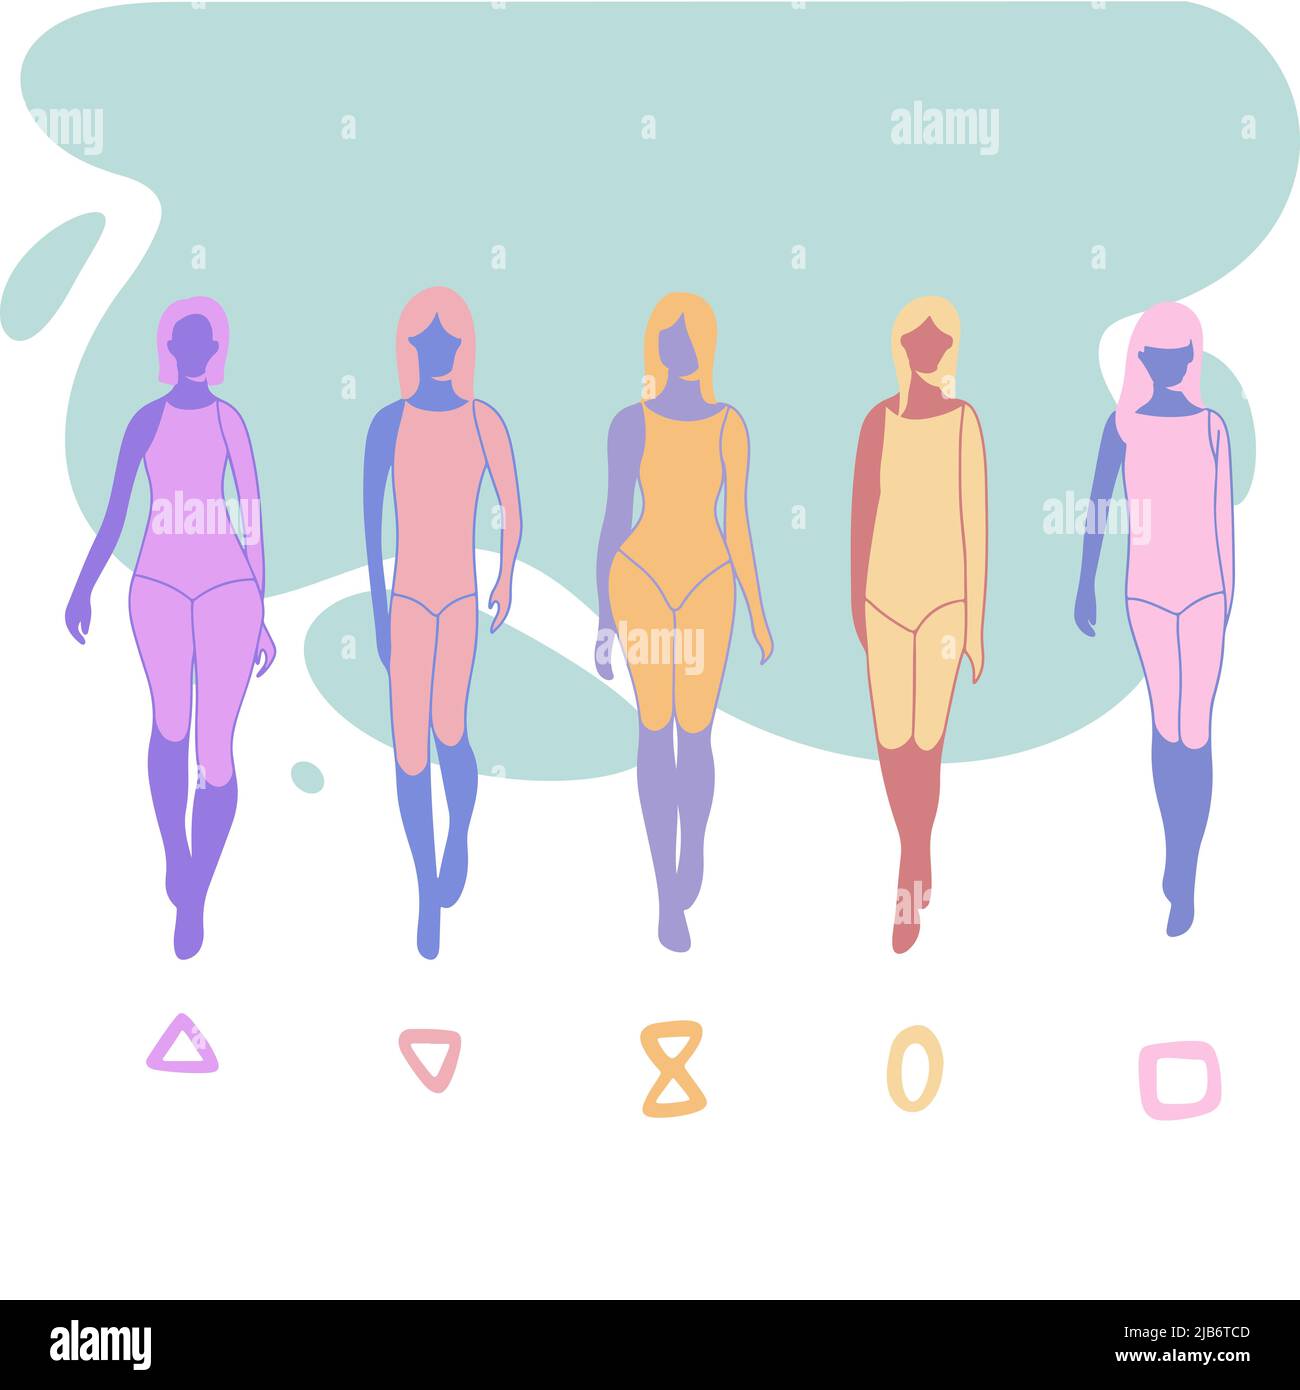 https://c8.alamy.com/comp/2JB6TCD/a-set-of-female-figure-types-five-types-hourglass-x-silhouette-pear-a-shaped-type-rectangle-h-shaped-silhouette-apple-o-shaped-type-inverted-2JB6TCD.jpg